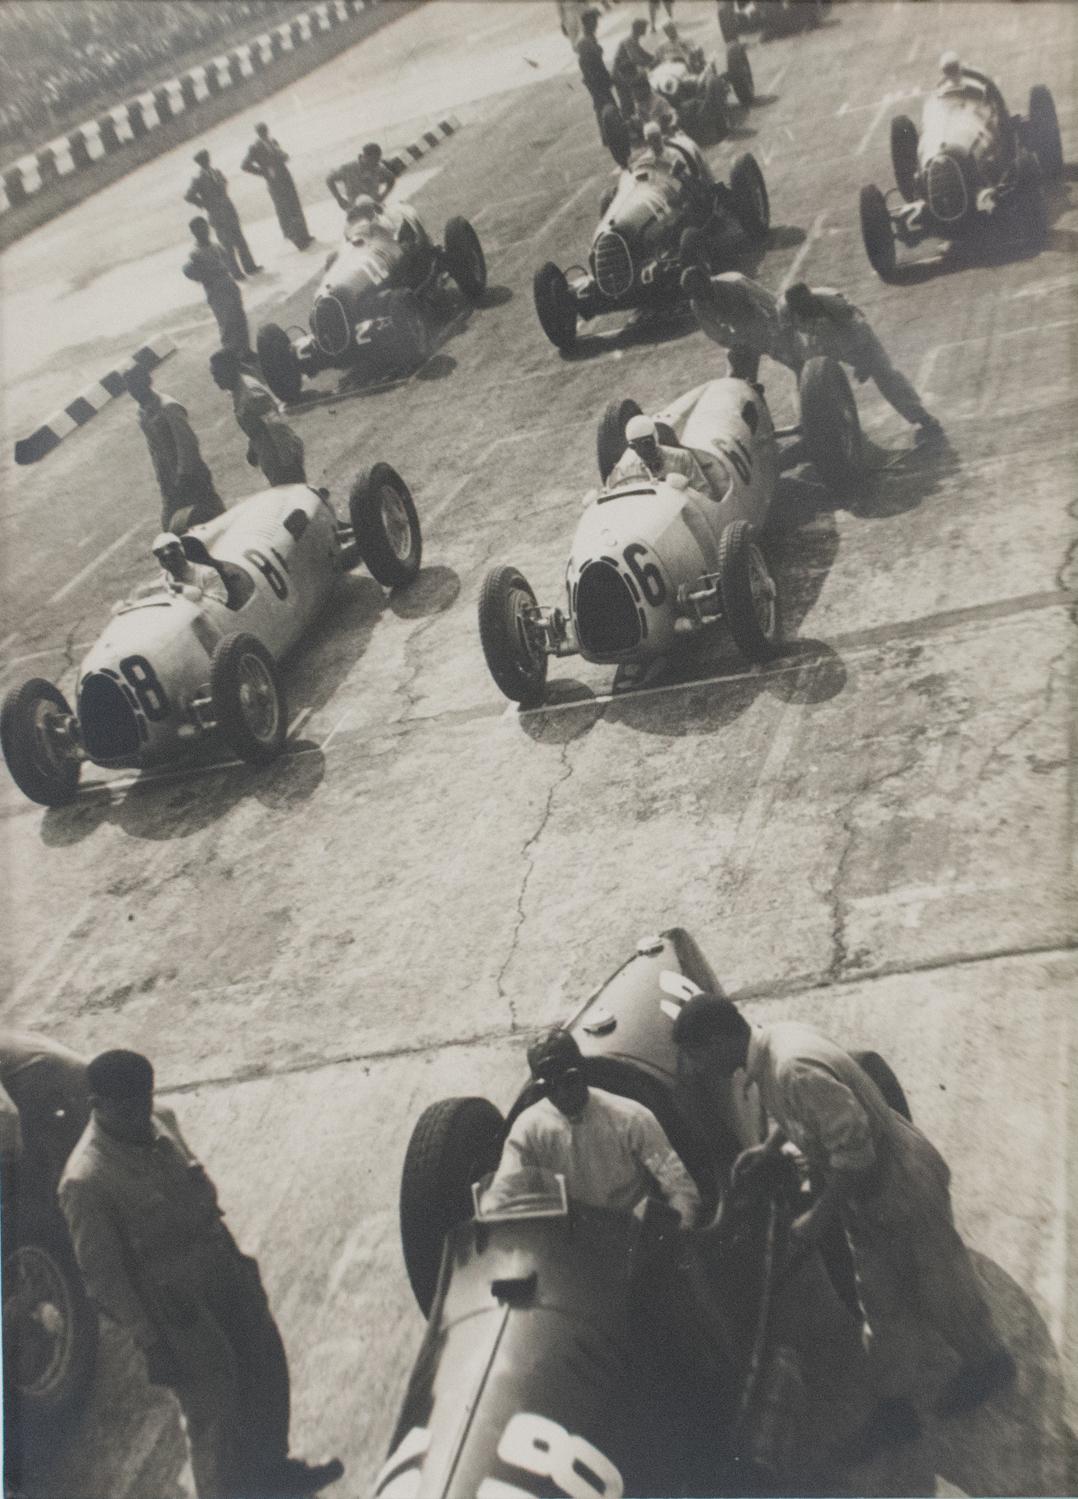 Lauro Bordin Black and White Photograph - 1936 Car Race in Monza Italy - Silver Gelatin Black & White Photograph Framed